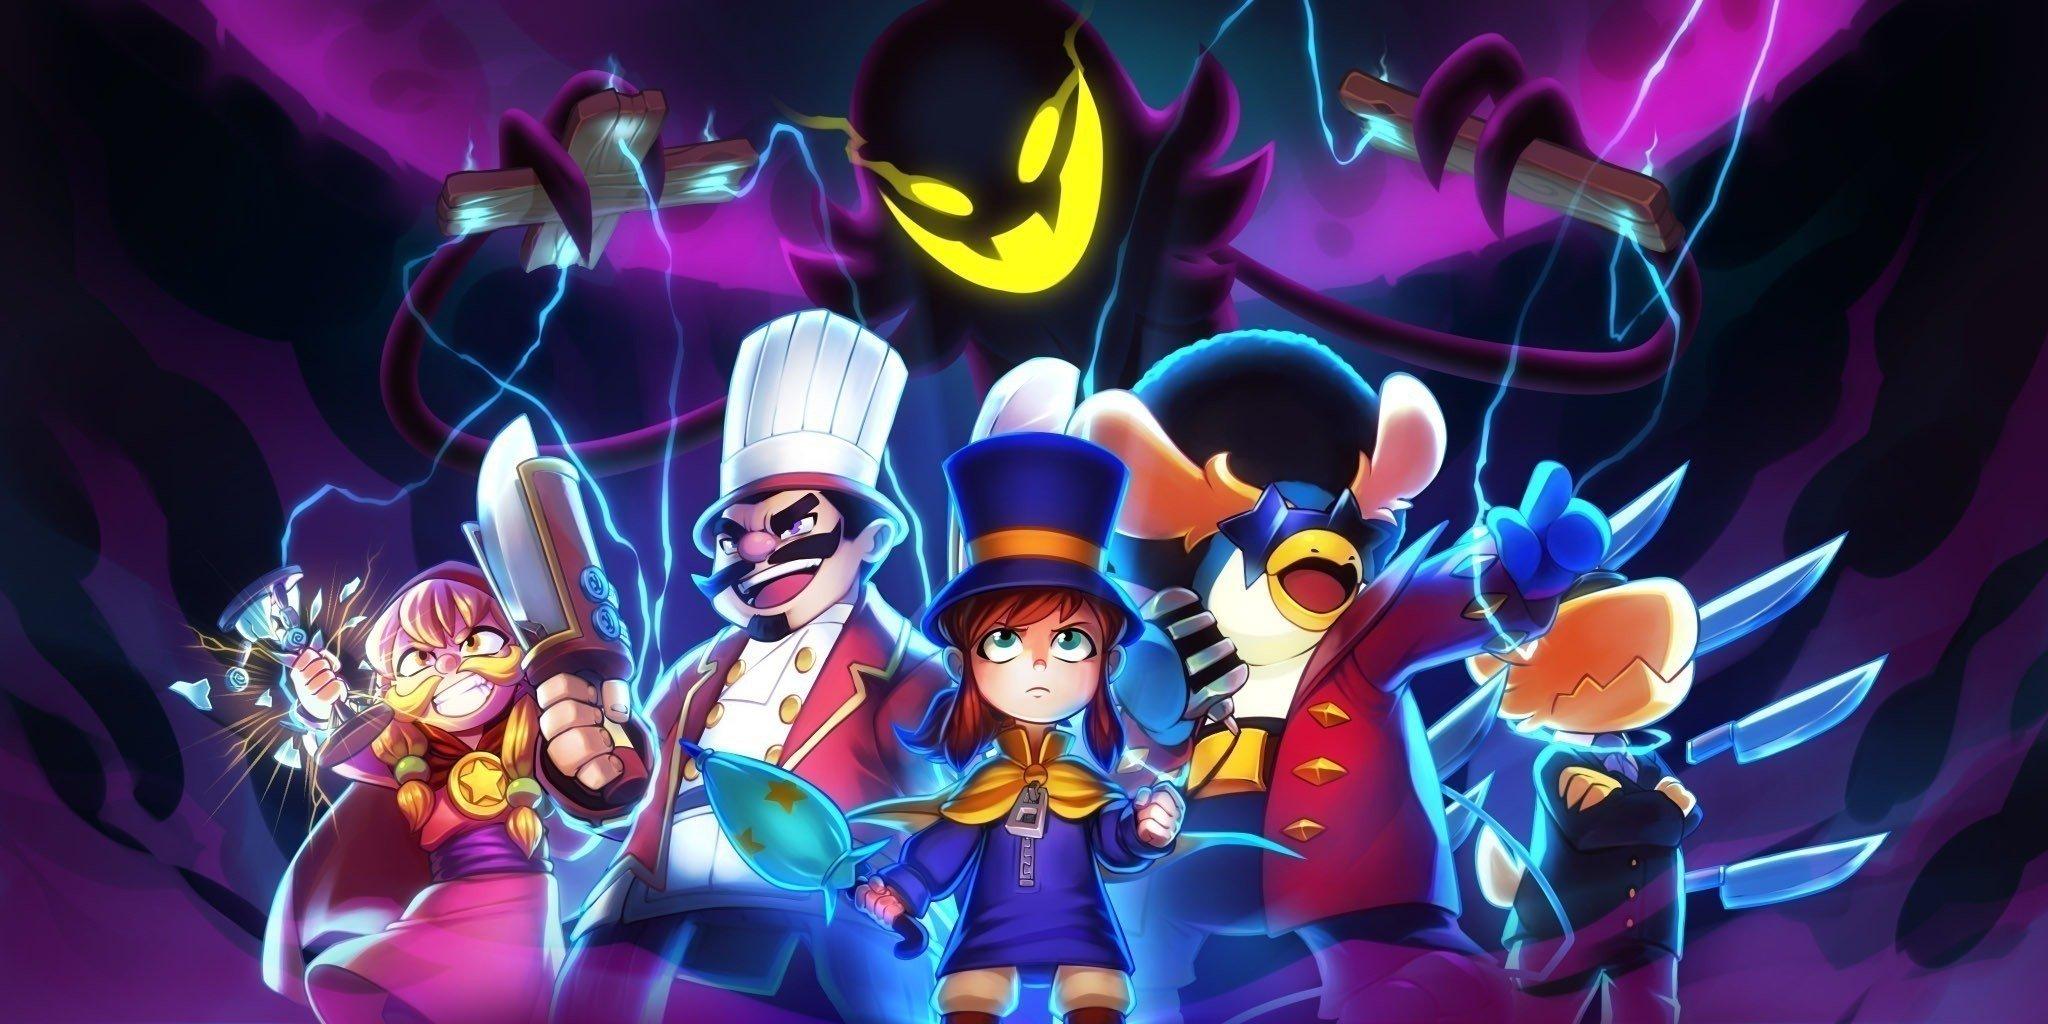 A Hat in Time: Seal the Deal Screenshots, Picture, Wallpaper